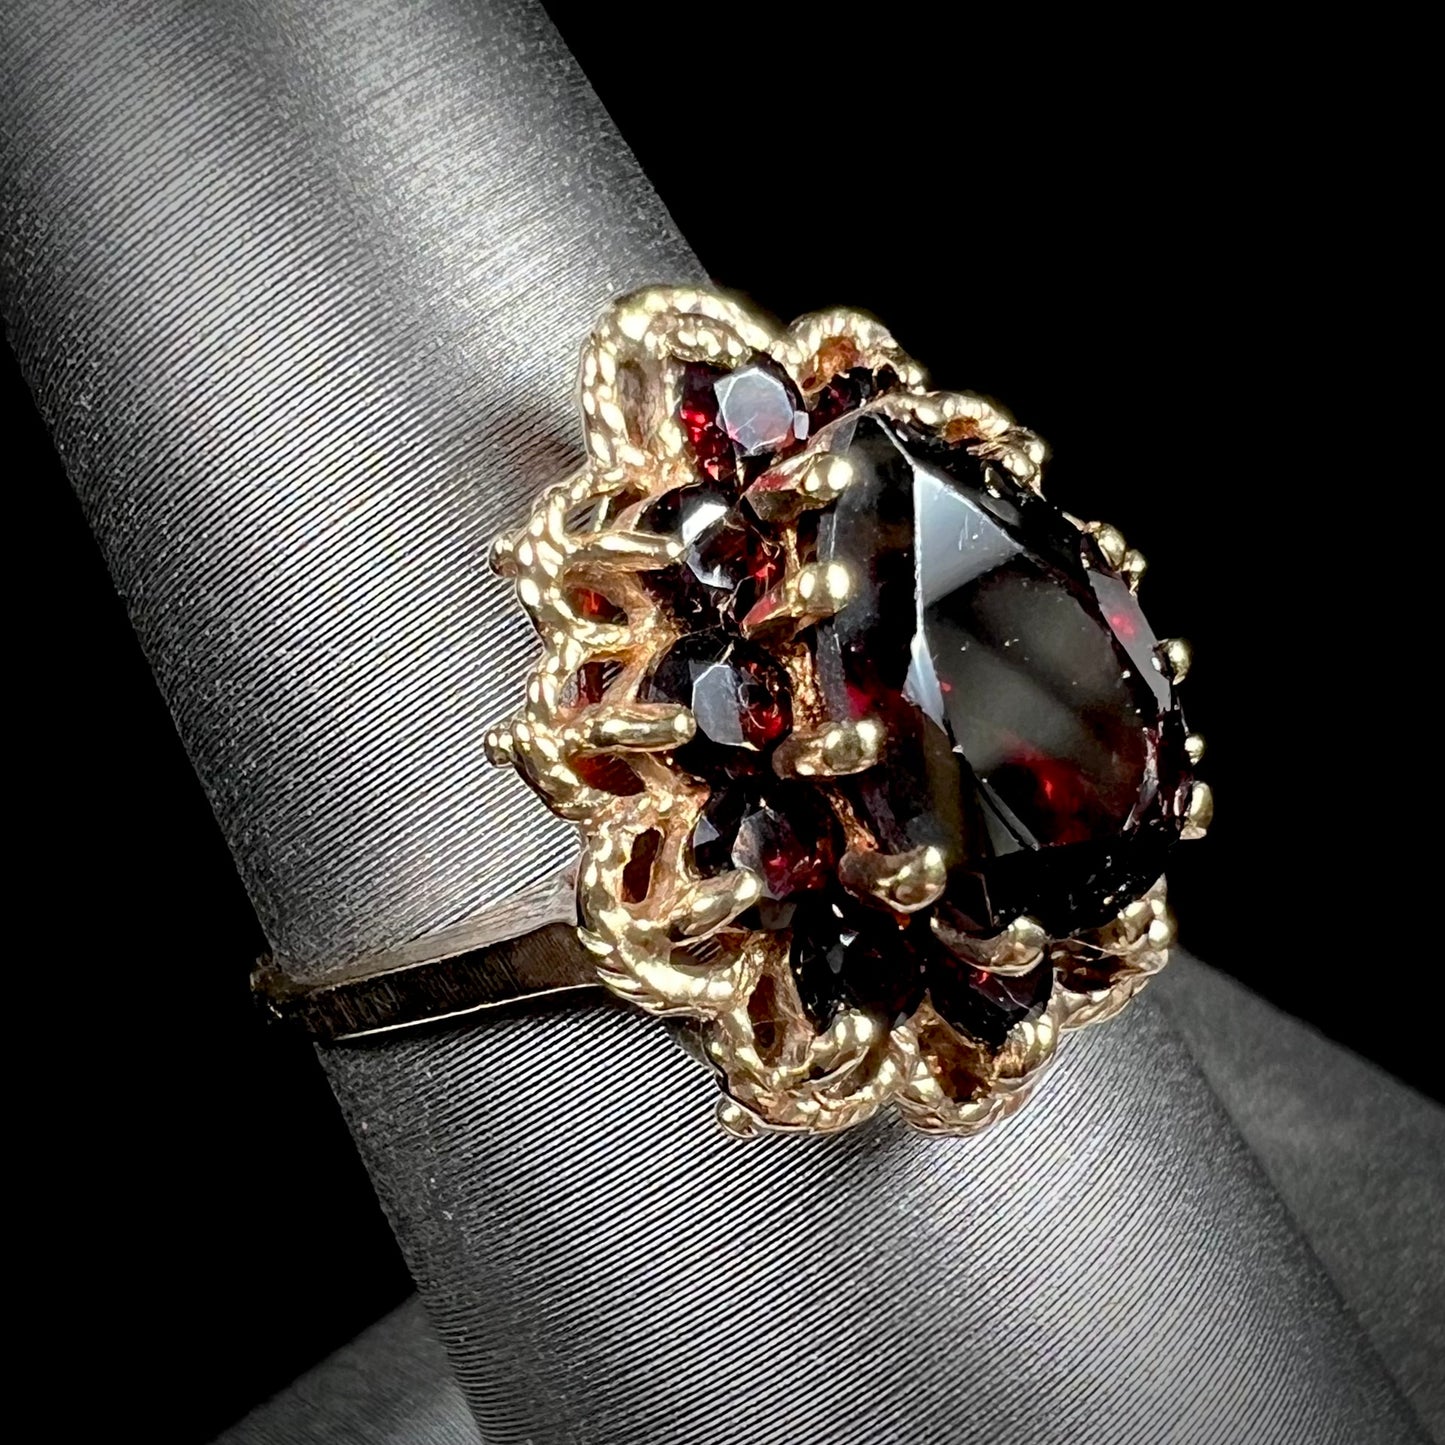 A vintage, 1940's style yellow gold ring set with a pear shaped almandine garnet.  A halo of round garnets surround the center stone.